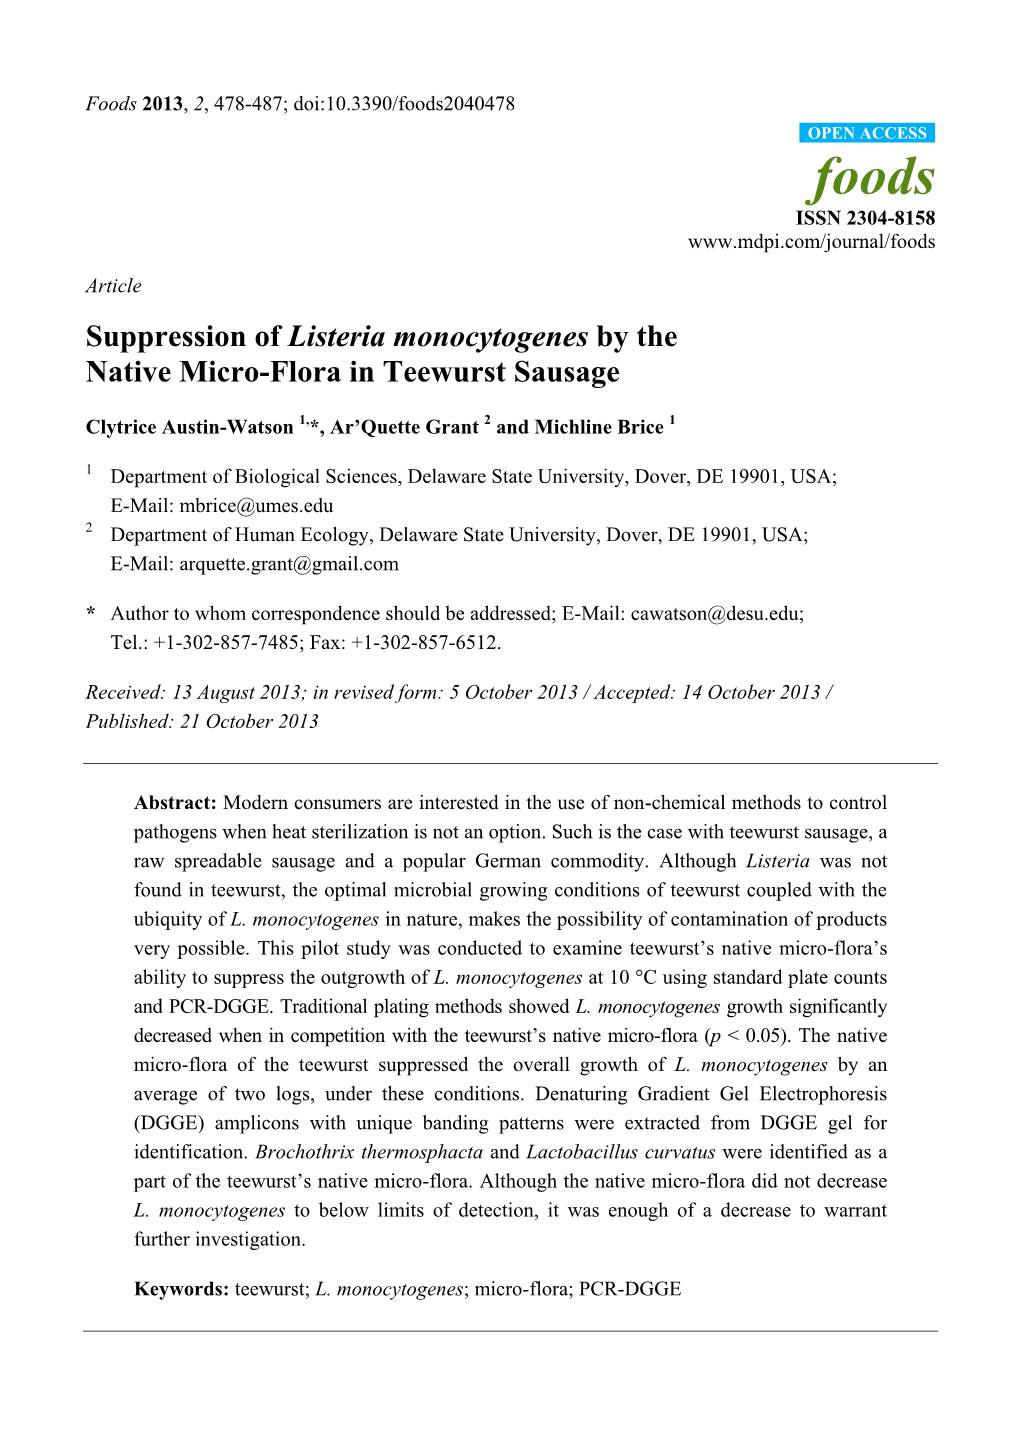 Suppression of Listeria Monocytogenes by the Native Micro-Flora in Teewurst Sausage